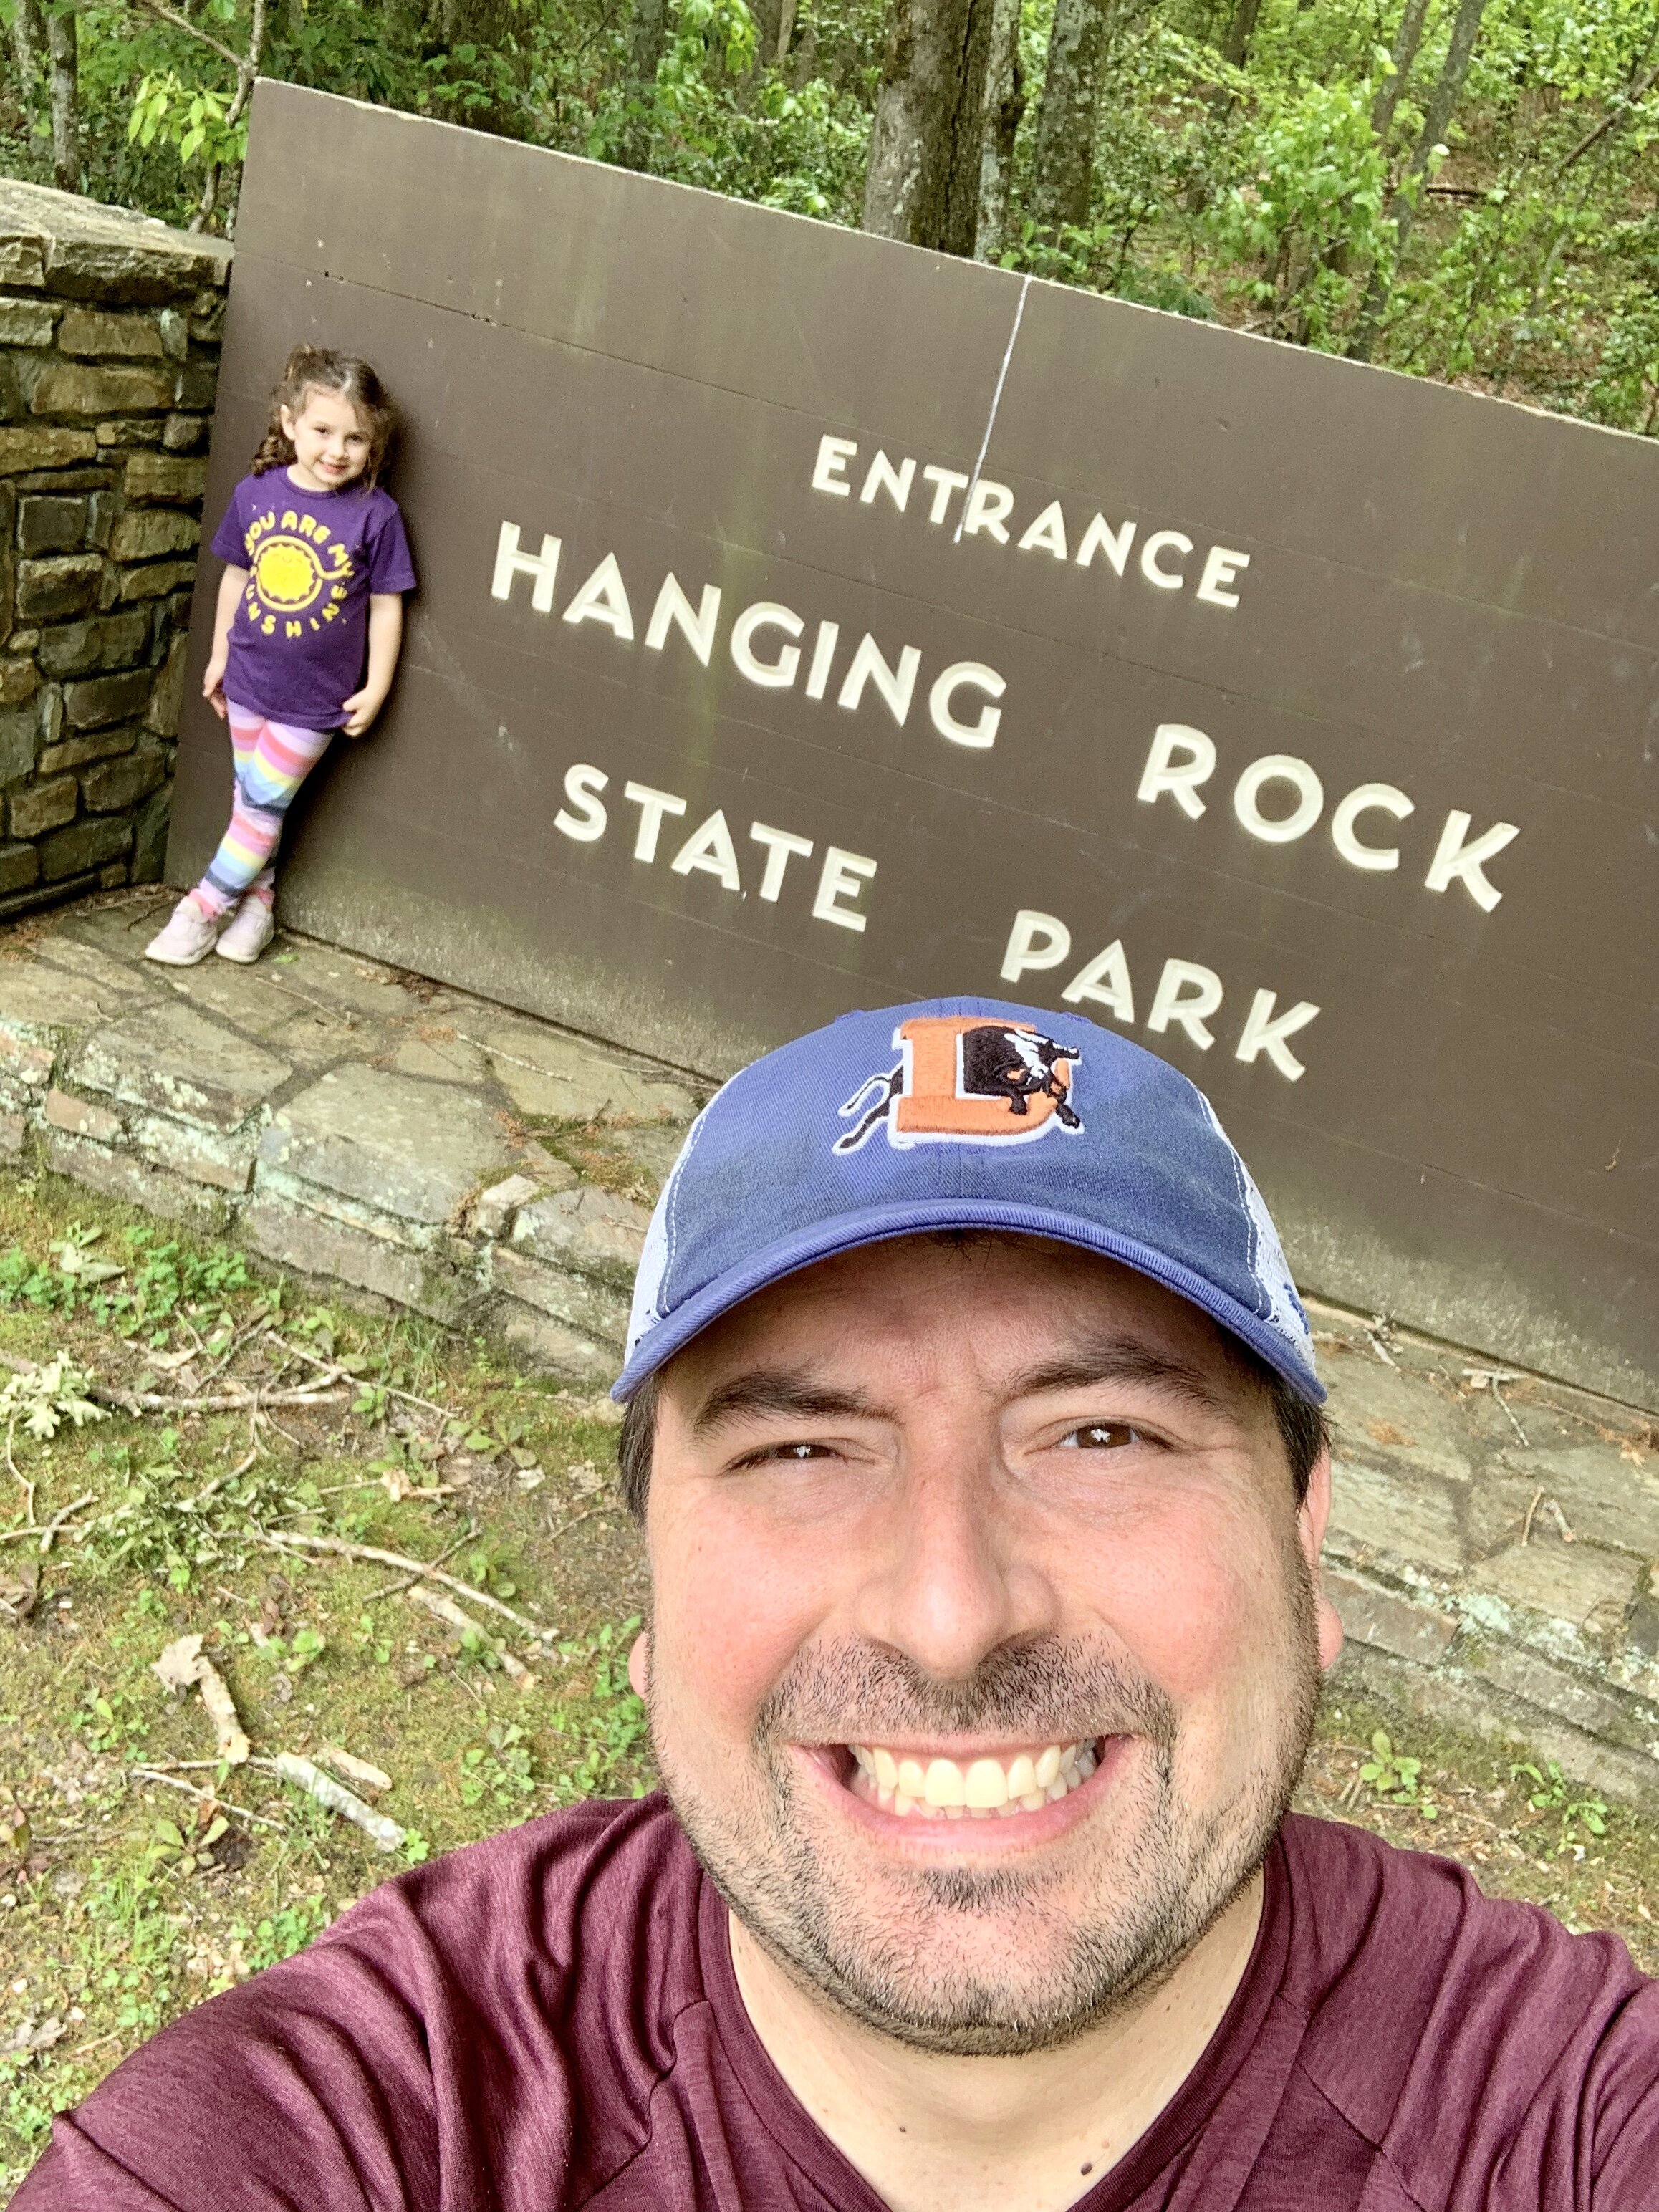 Our park selfie at the entrance to Hanging Rock State Park